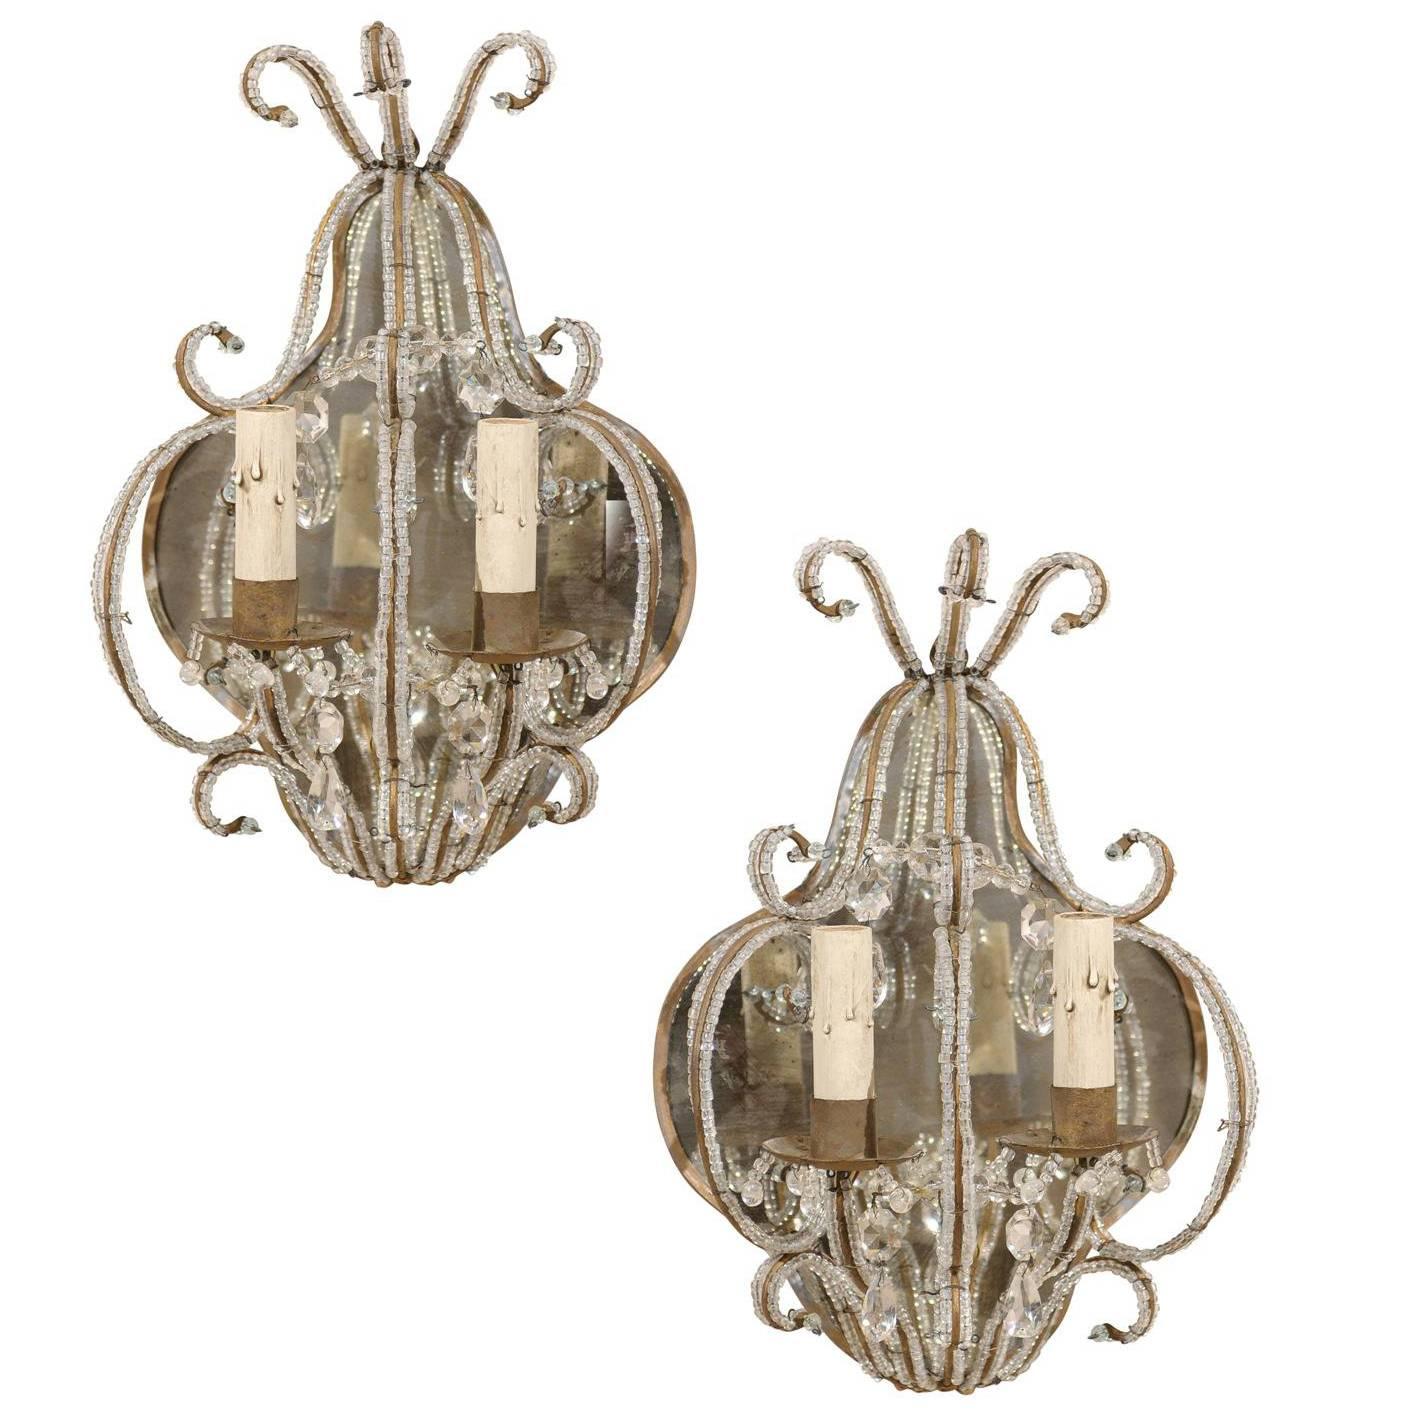 Pair of Italian Mirrored Sconces with Elegant Beaded Armature and Scrolls